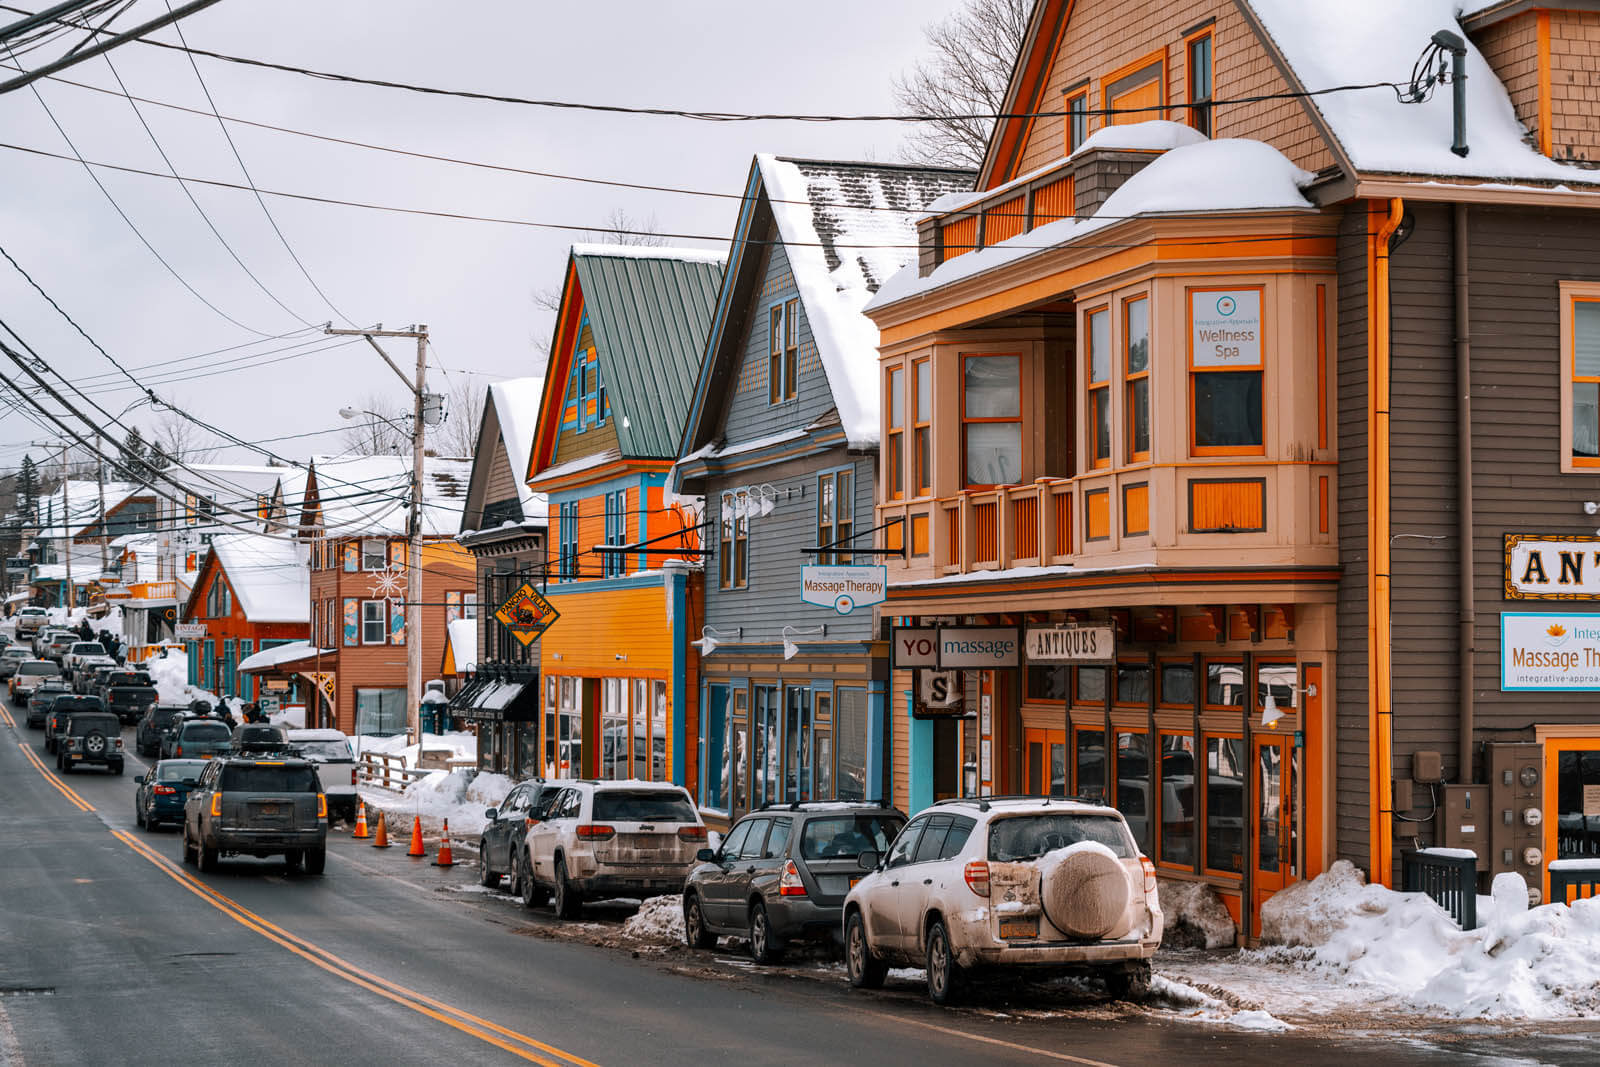 colorful town of Tannersville near Hunter in the Catskills in Upstate New York